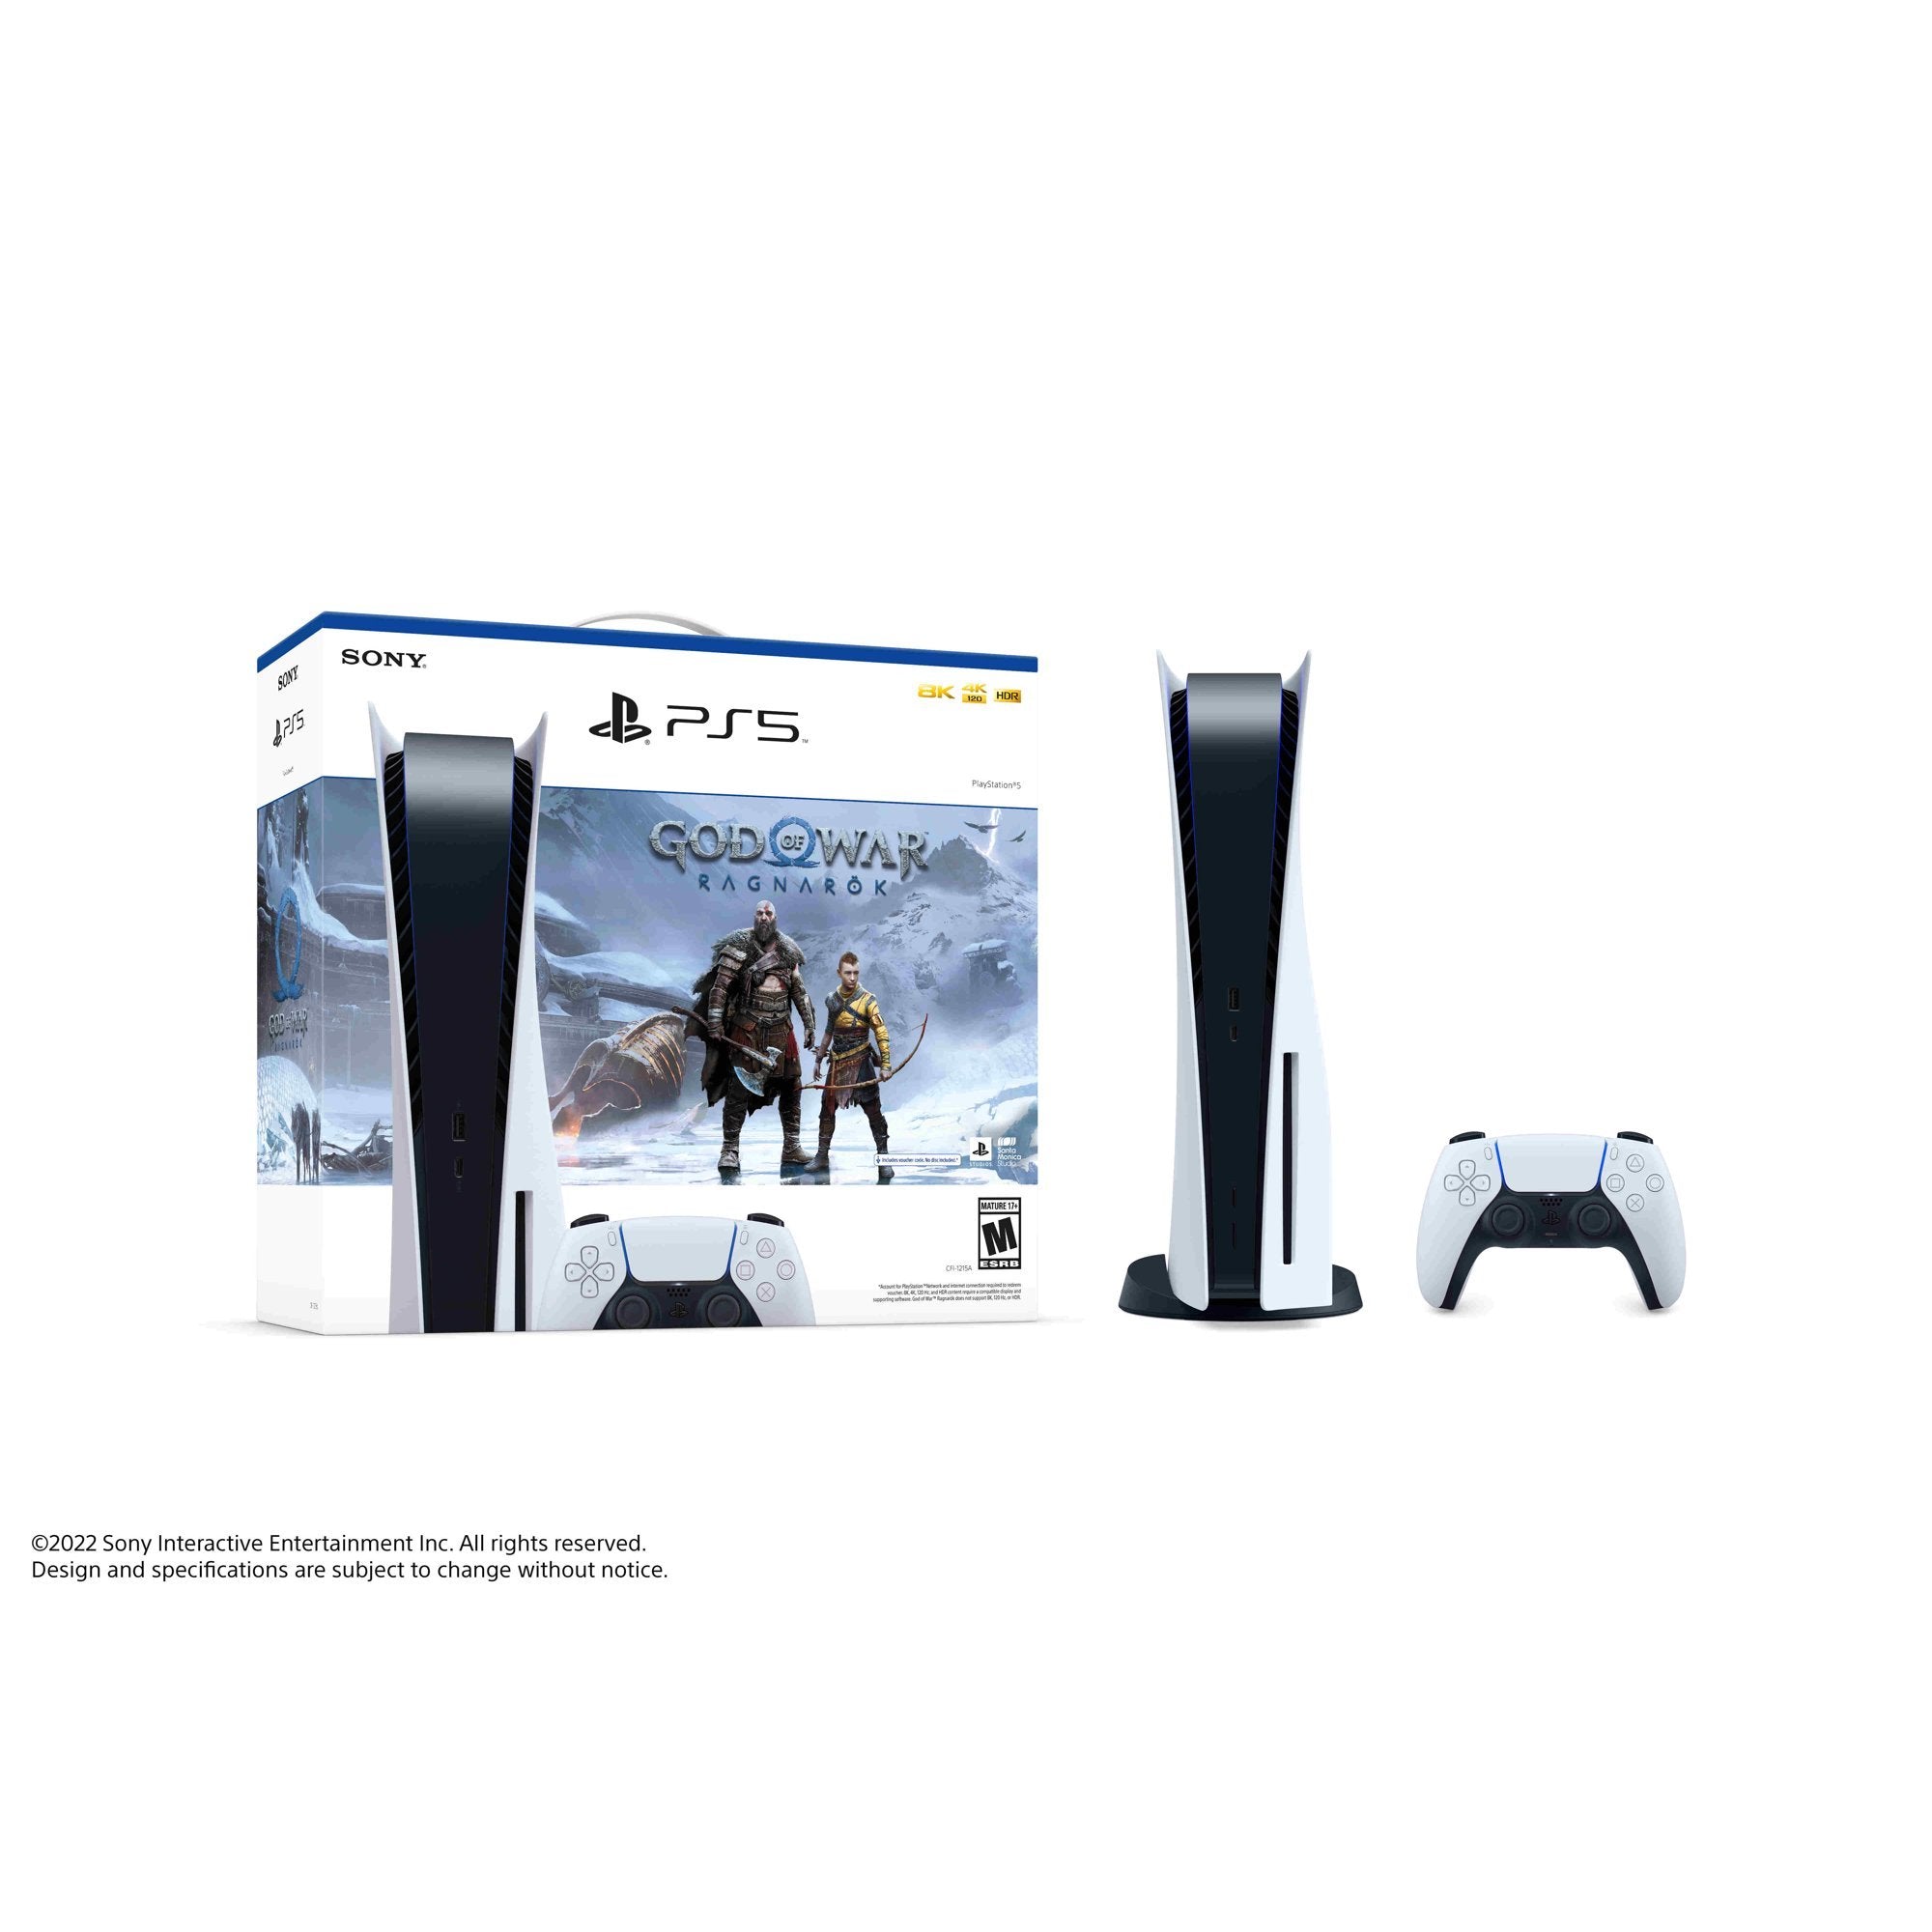 Sony - PlayStation 5 Disc Edition God of War Ragnarok Bundle with Two Controllers White and Starlight Blue DualSense and Mytrix Hard Shell Protective Controller Case